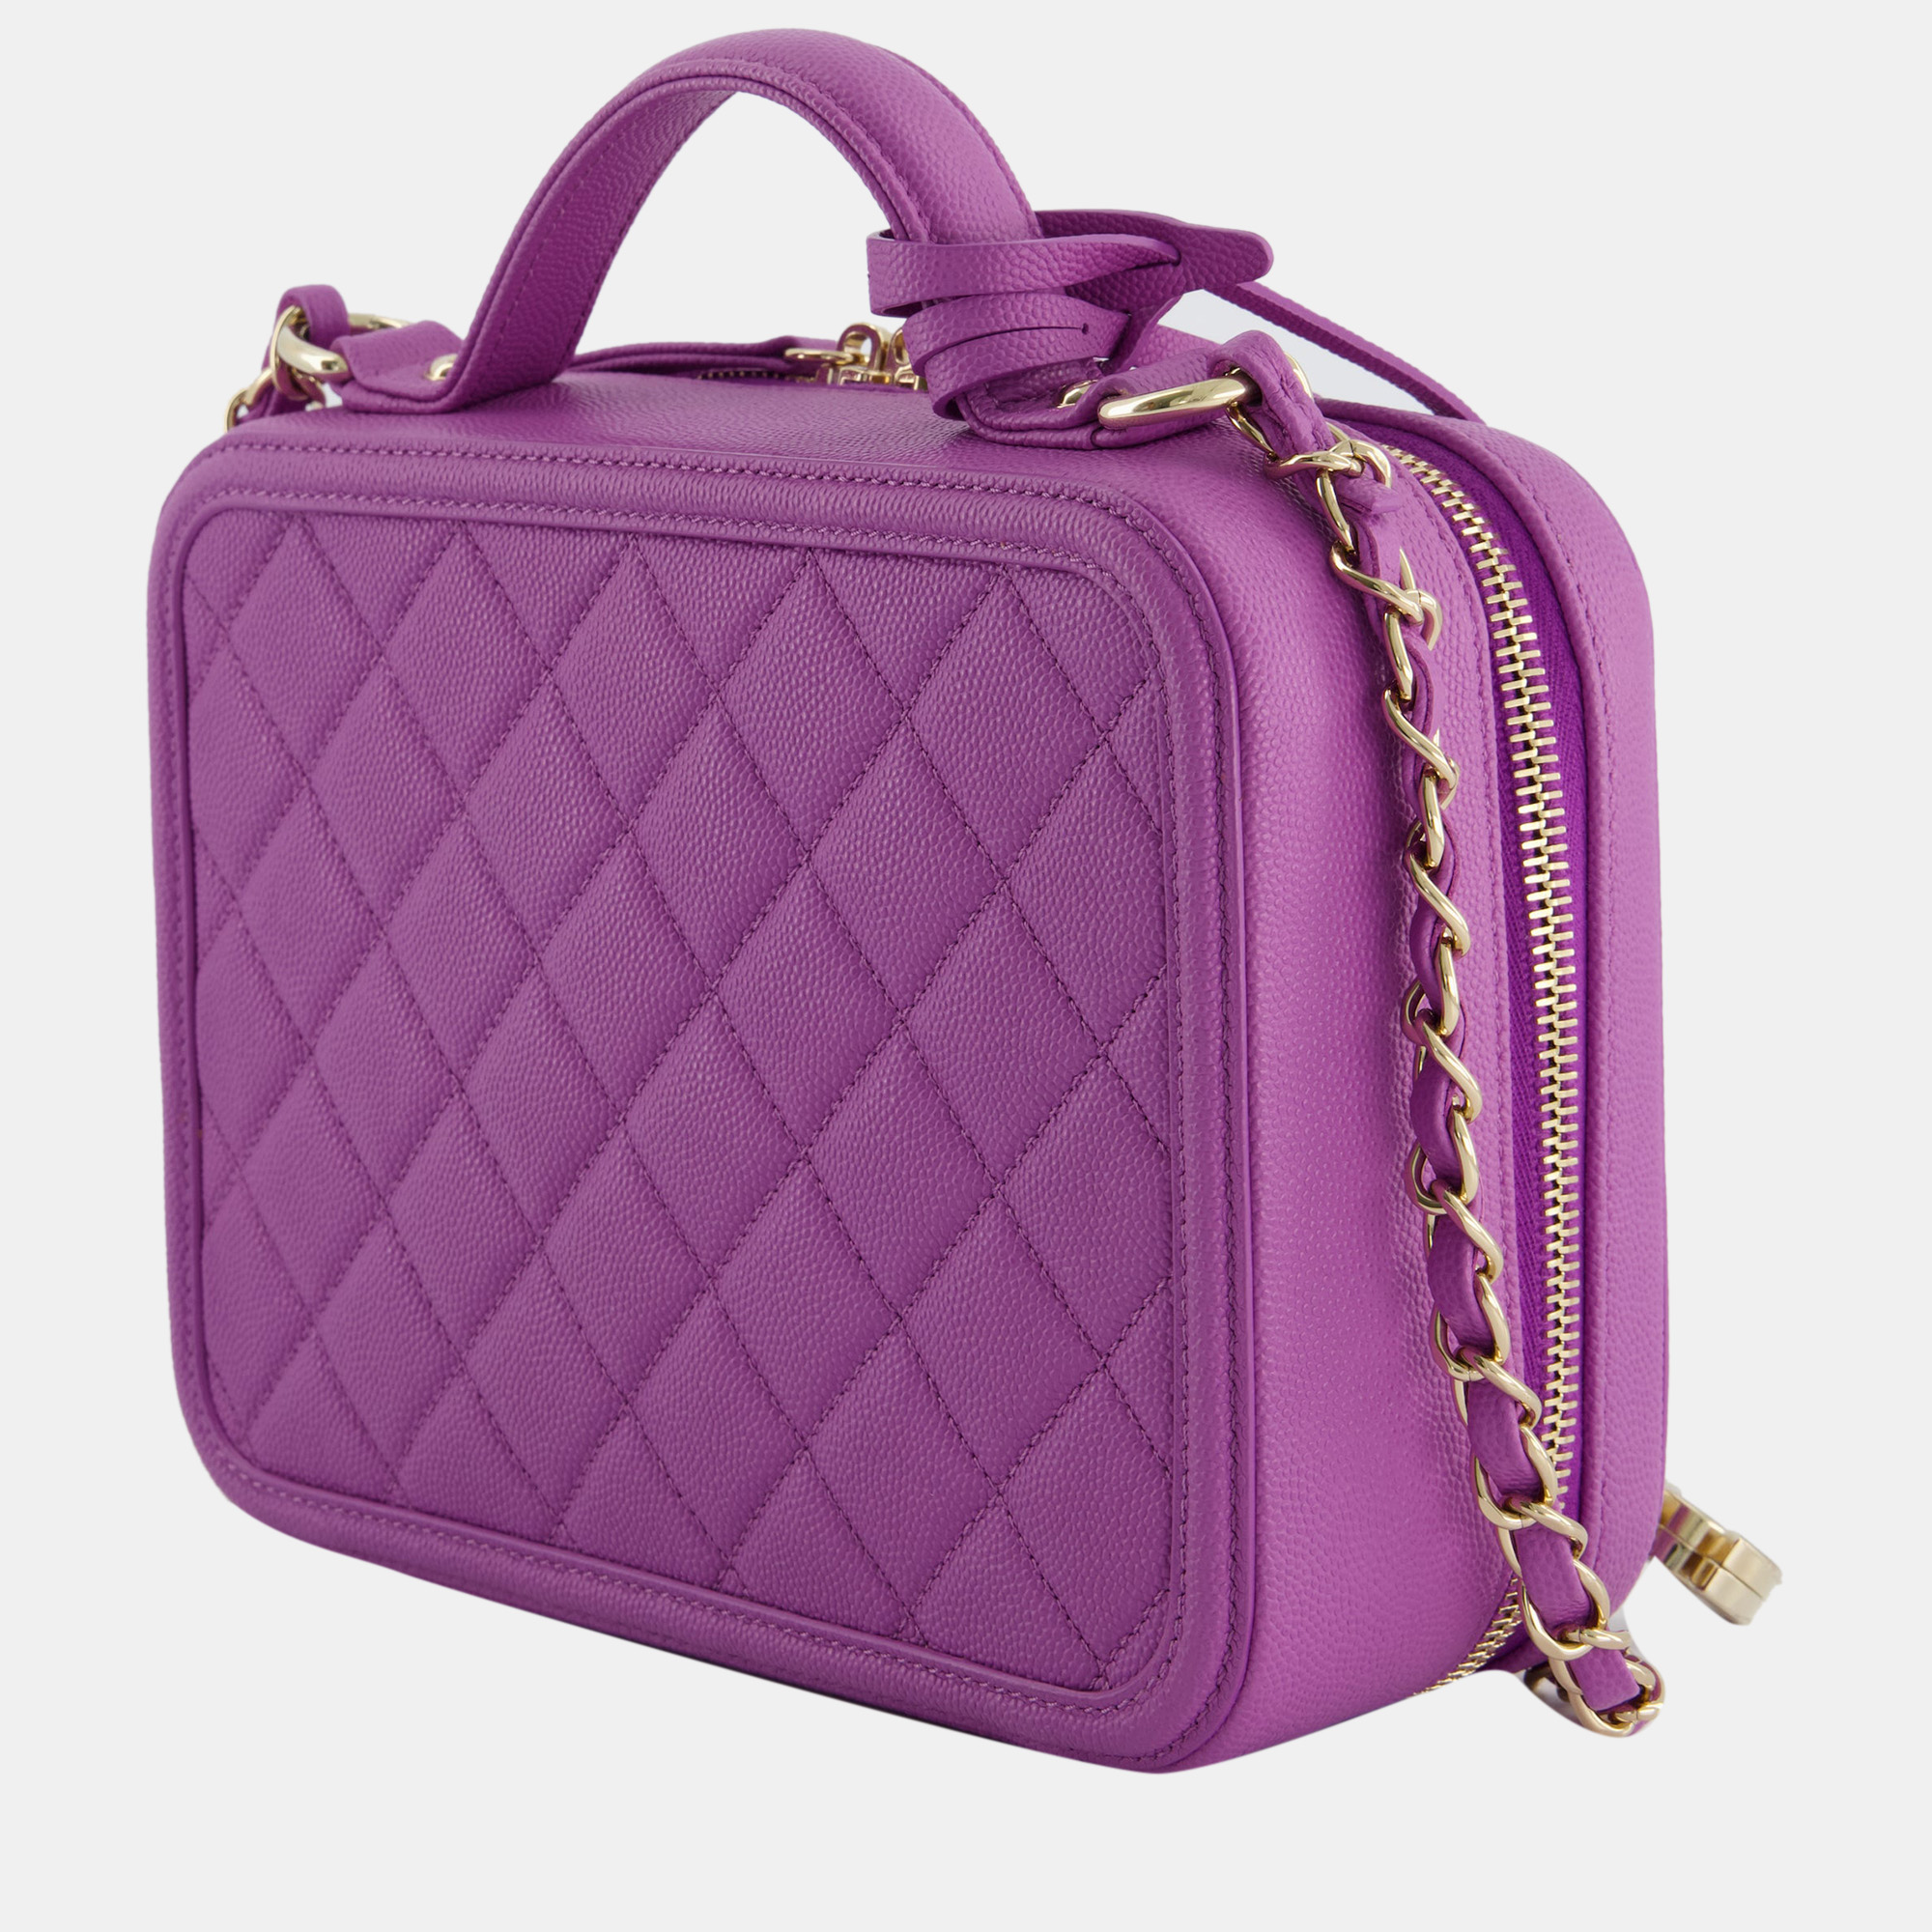 Chanel Purple CC Vanity Case Bag In Caviar Leather With Champagne Gold Hardware